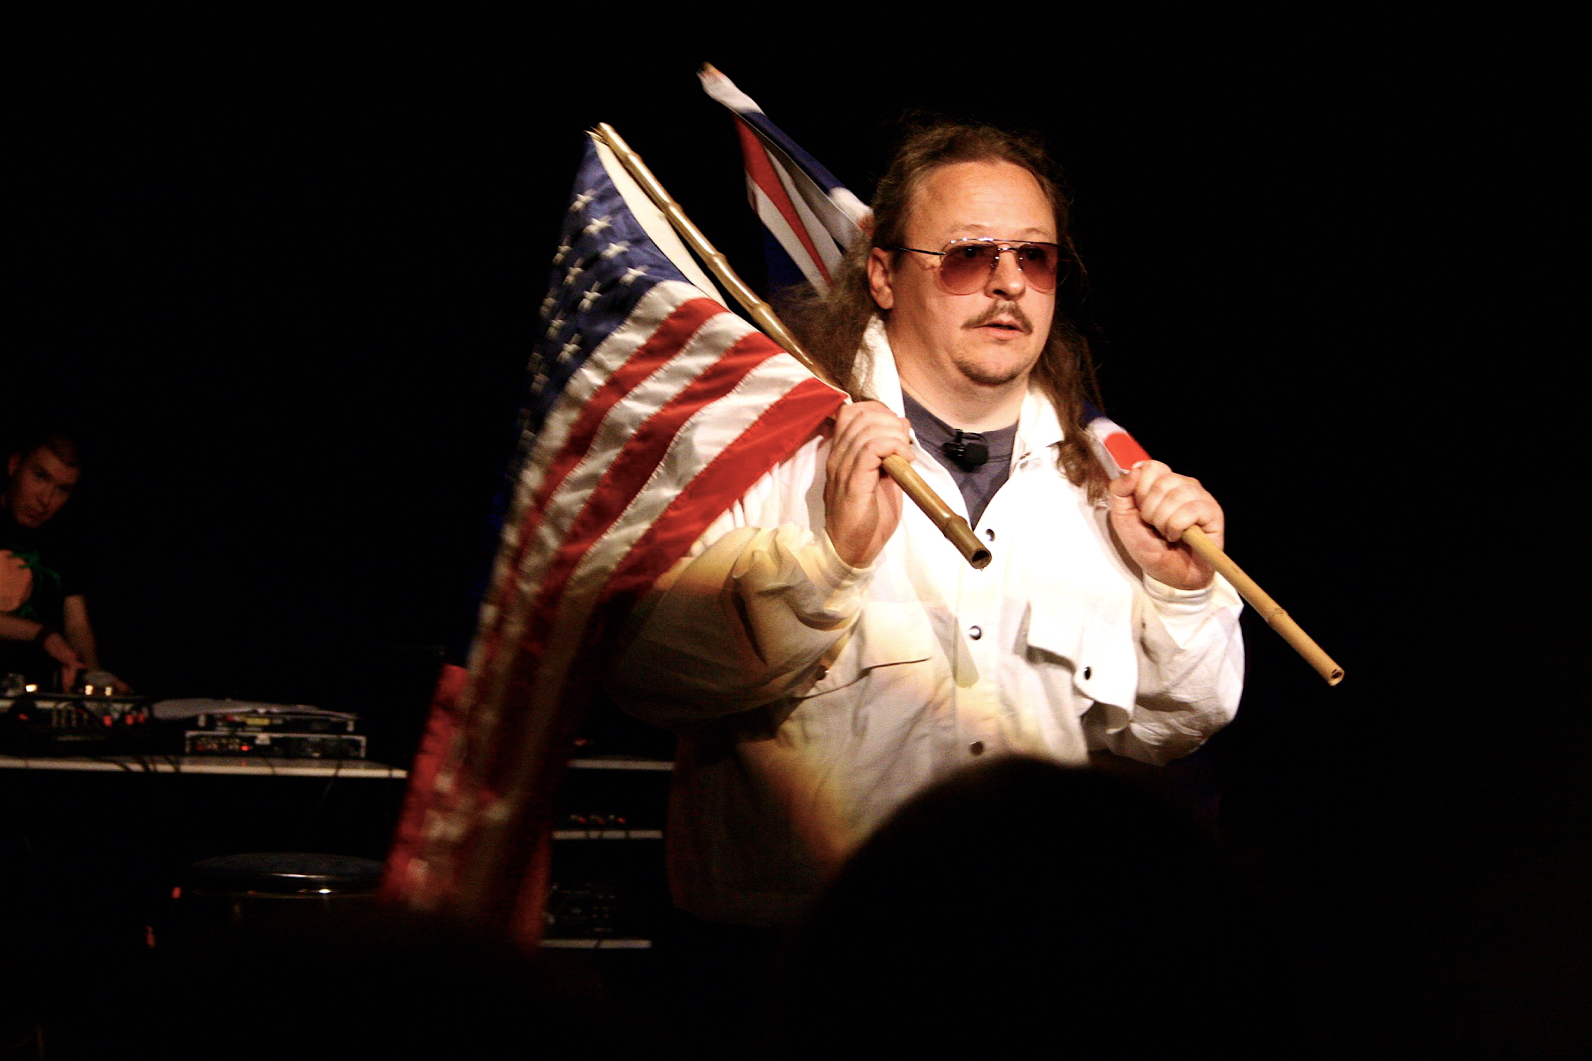 Close up to the performer on stage with sunglasses on holding the flags of USA and Britain on his shoulders